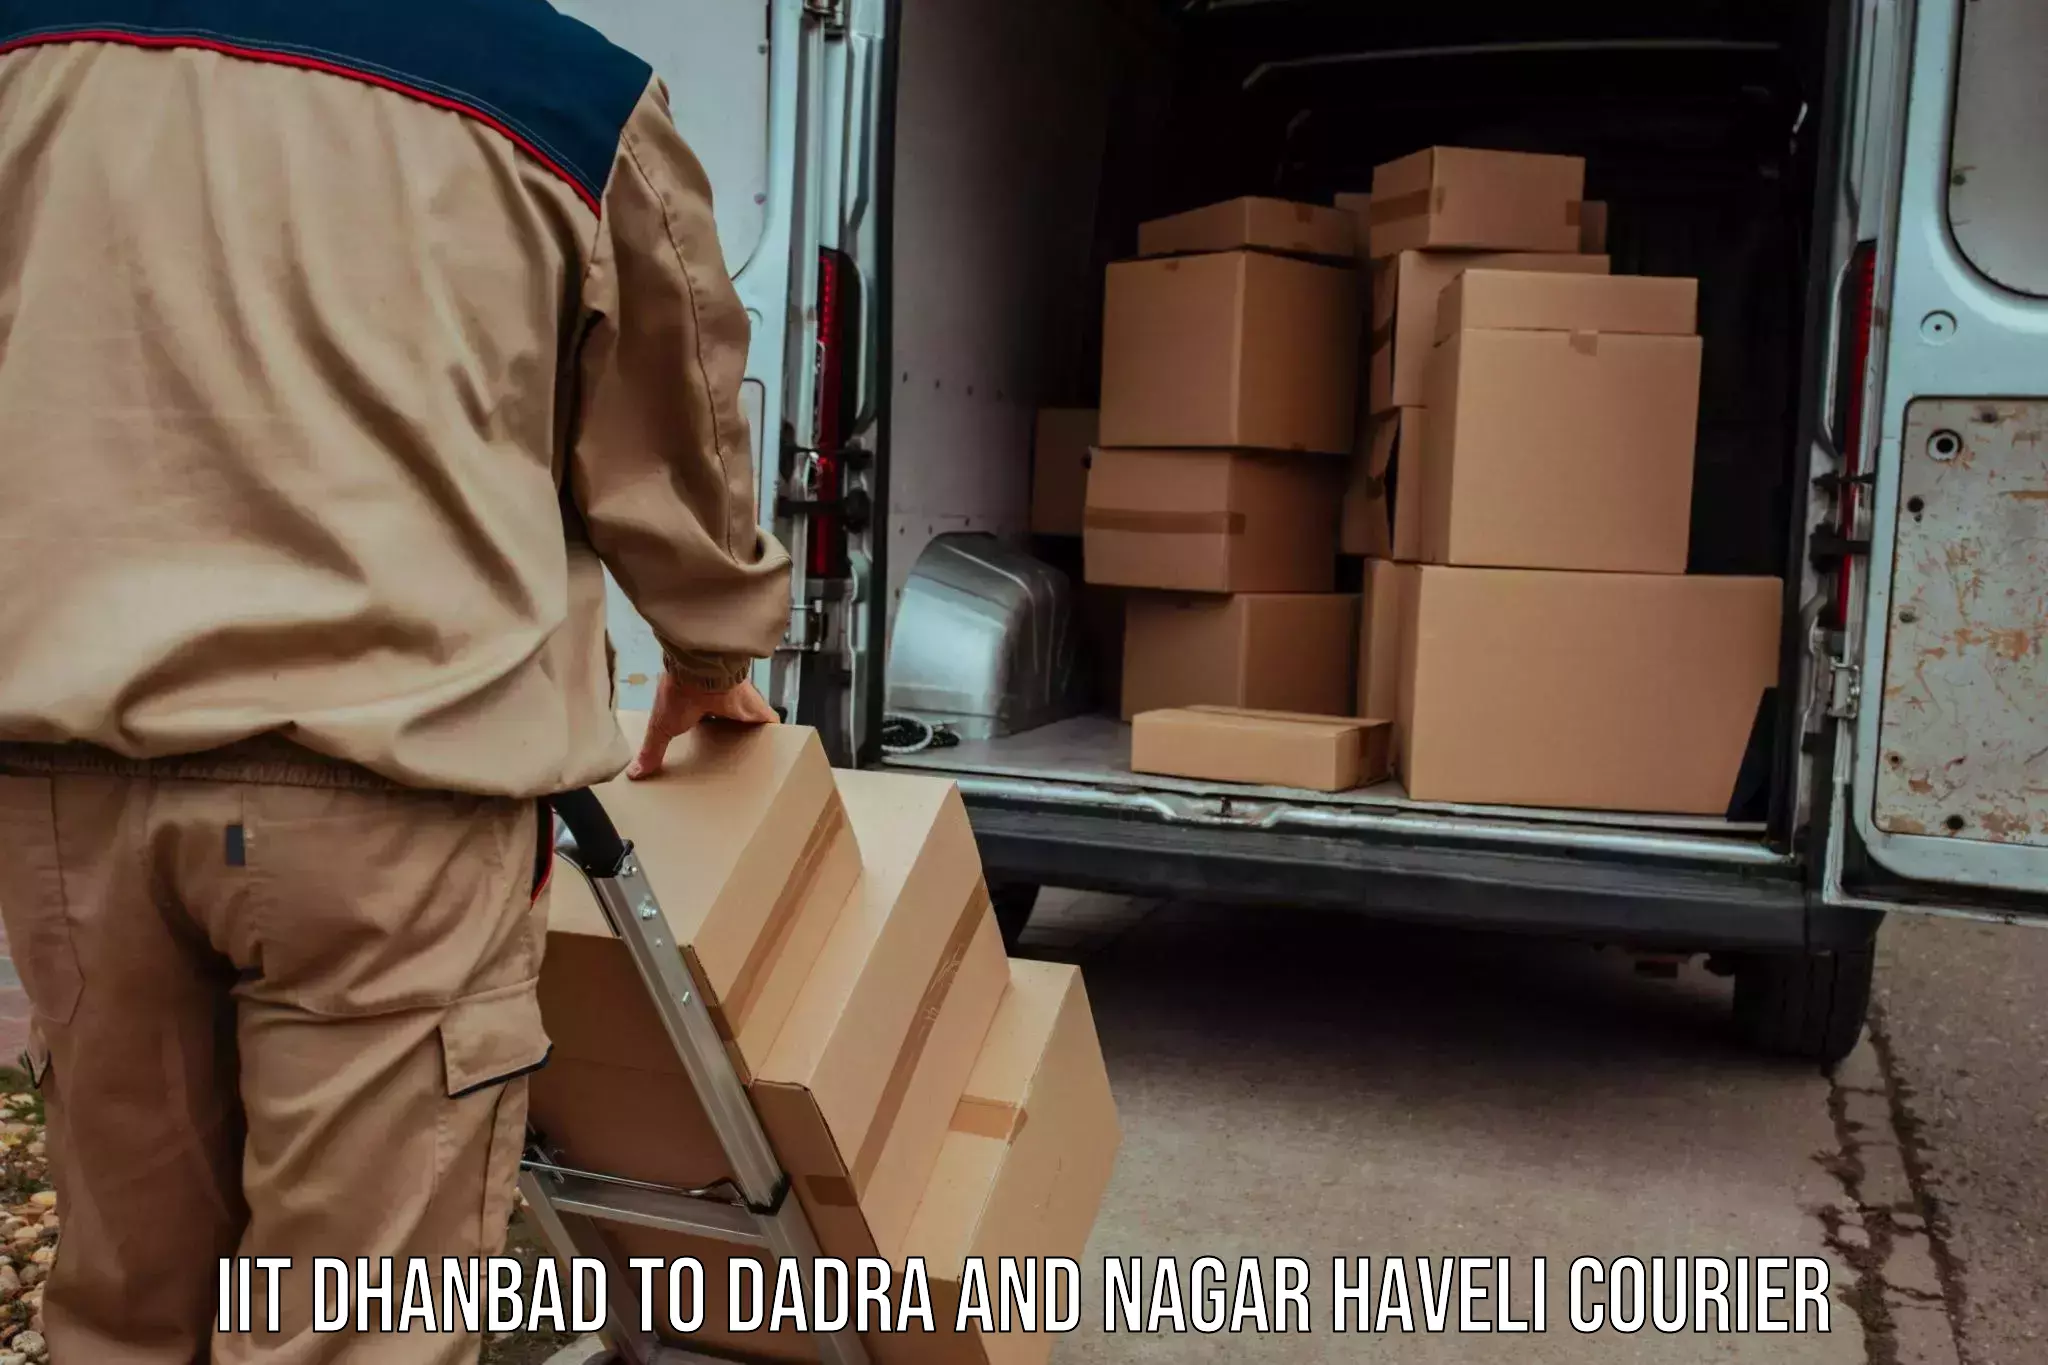 Quality courier services in IIT Dhanbad to Dadra and Nagar Haveli